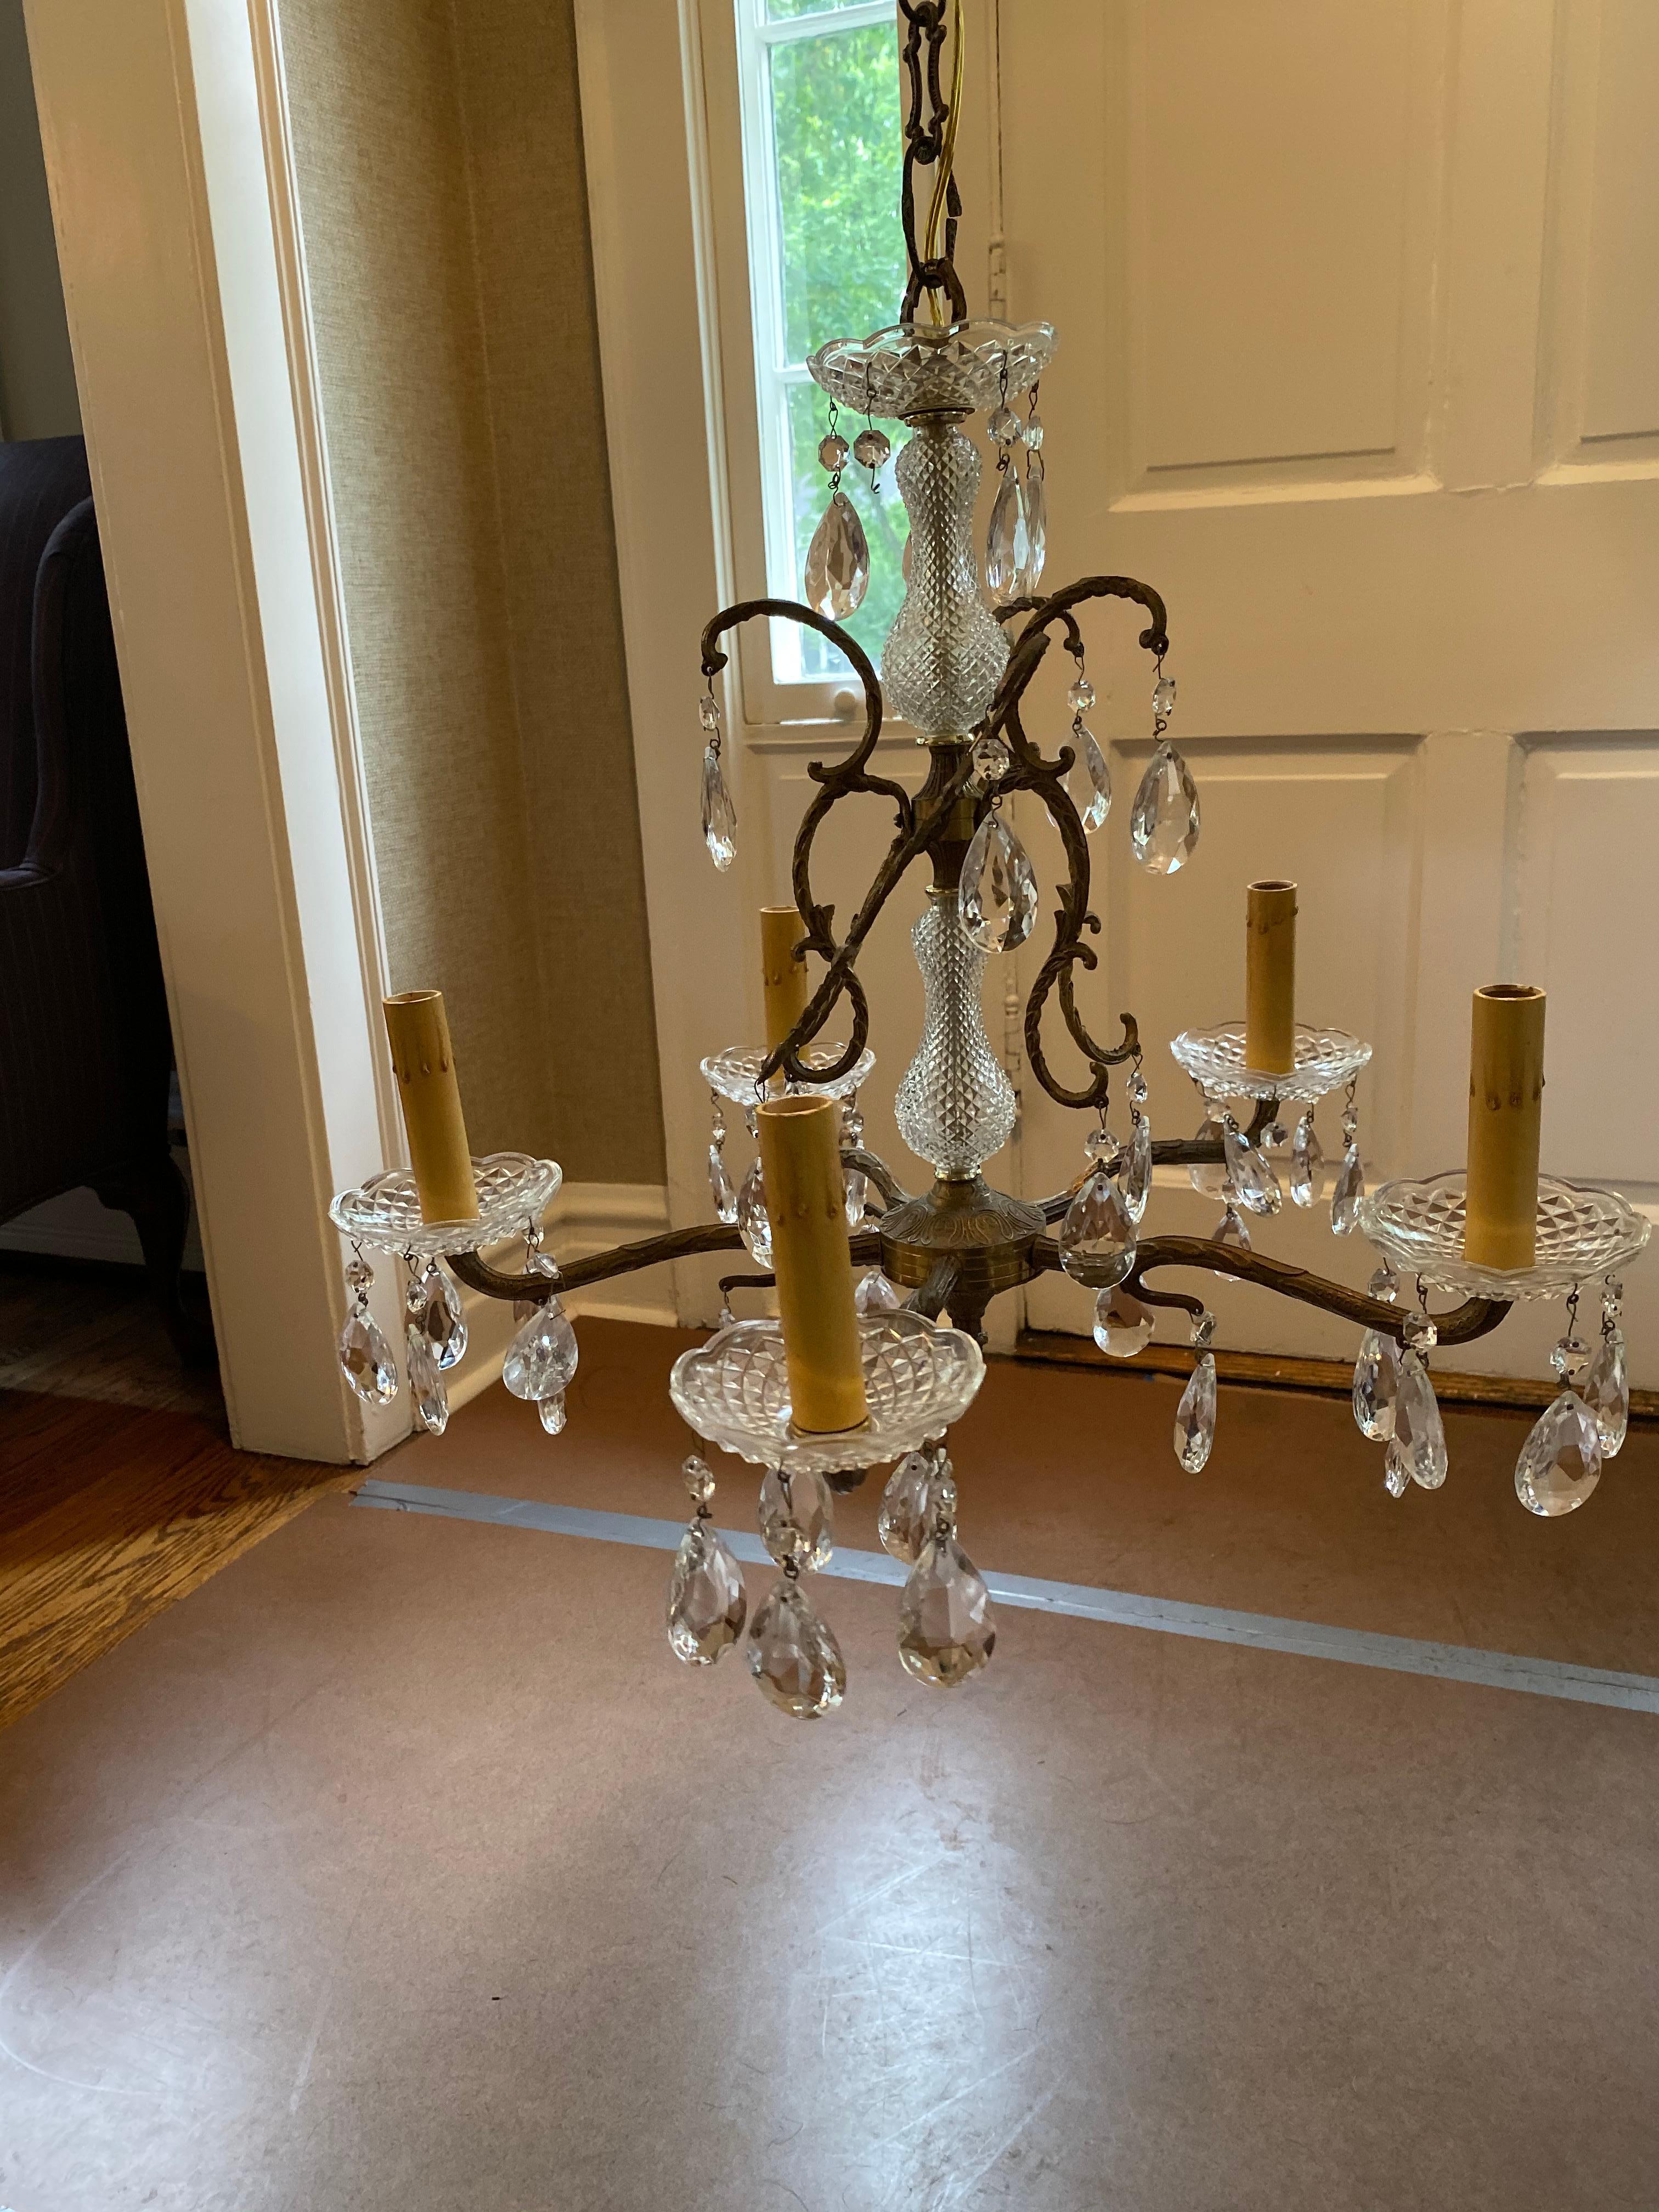 Vintage French Crystal and Bronze Chandelier from Marche Aux Puces, Paris For Sale 2